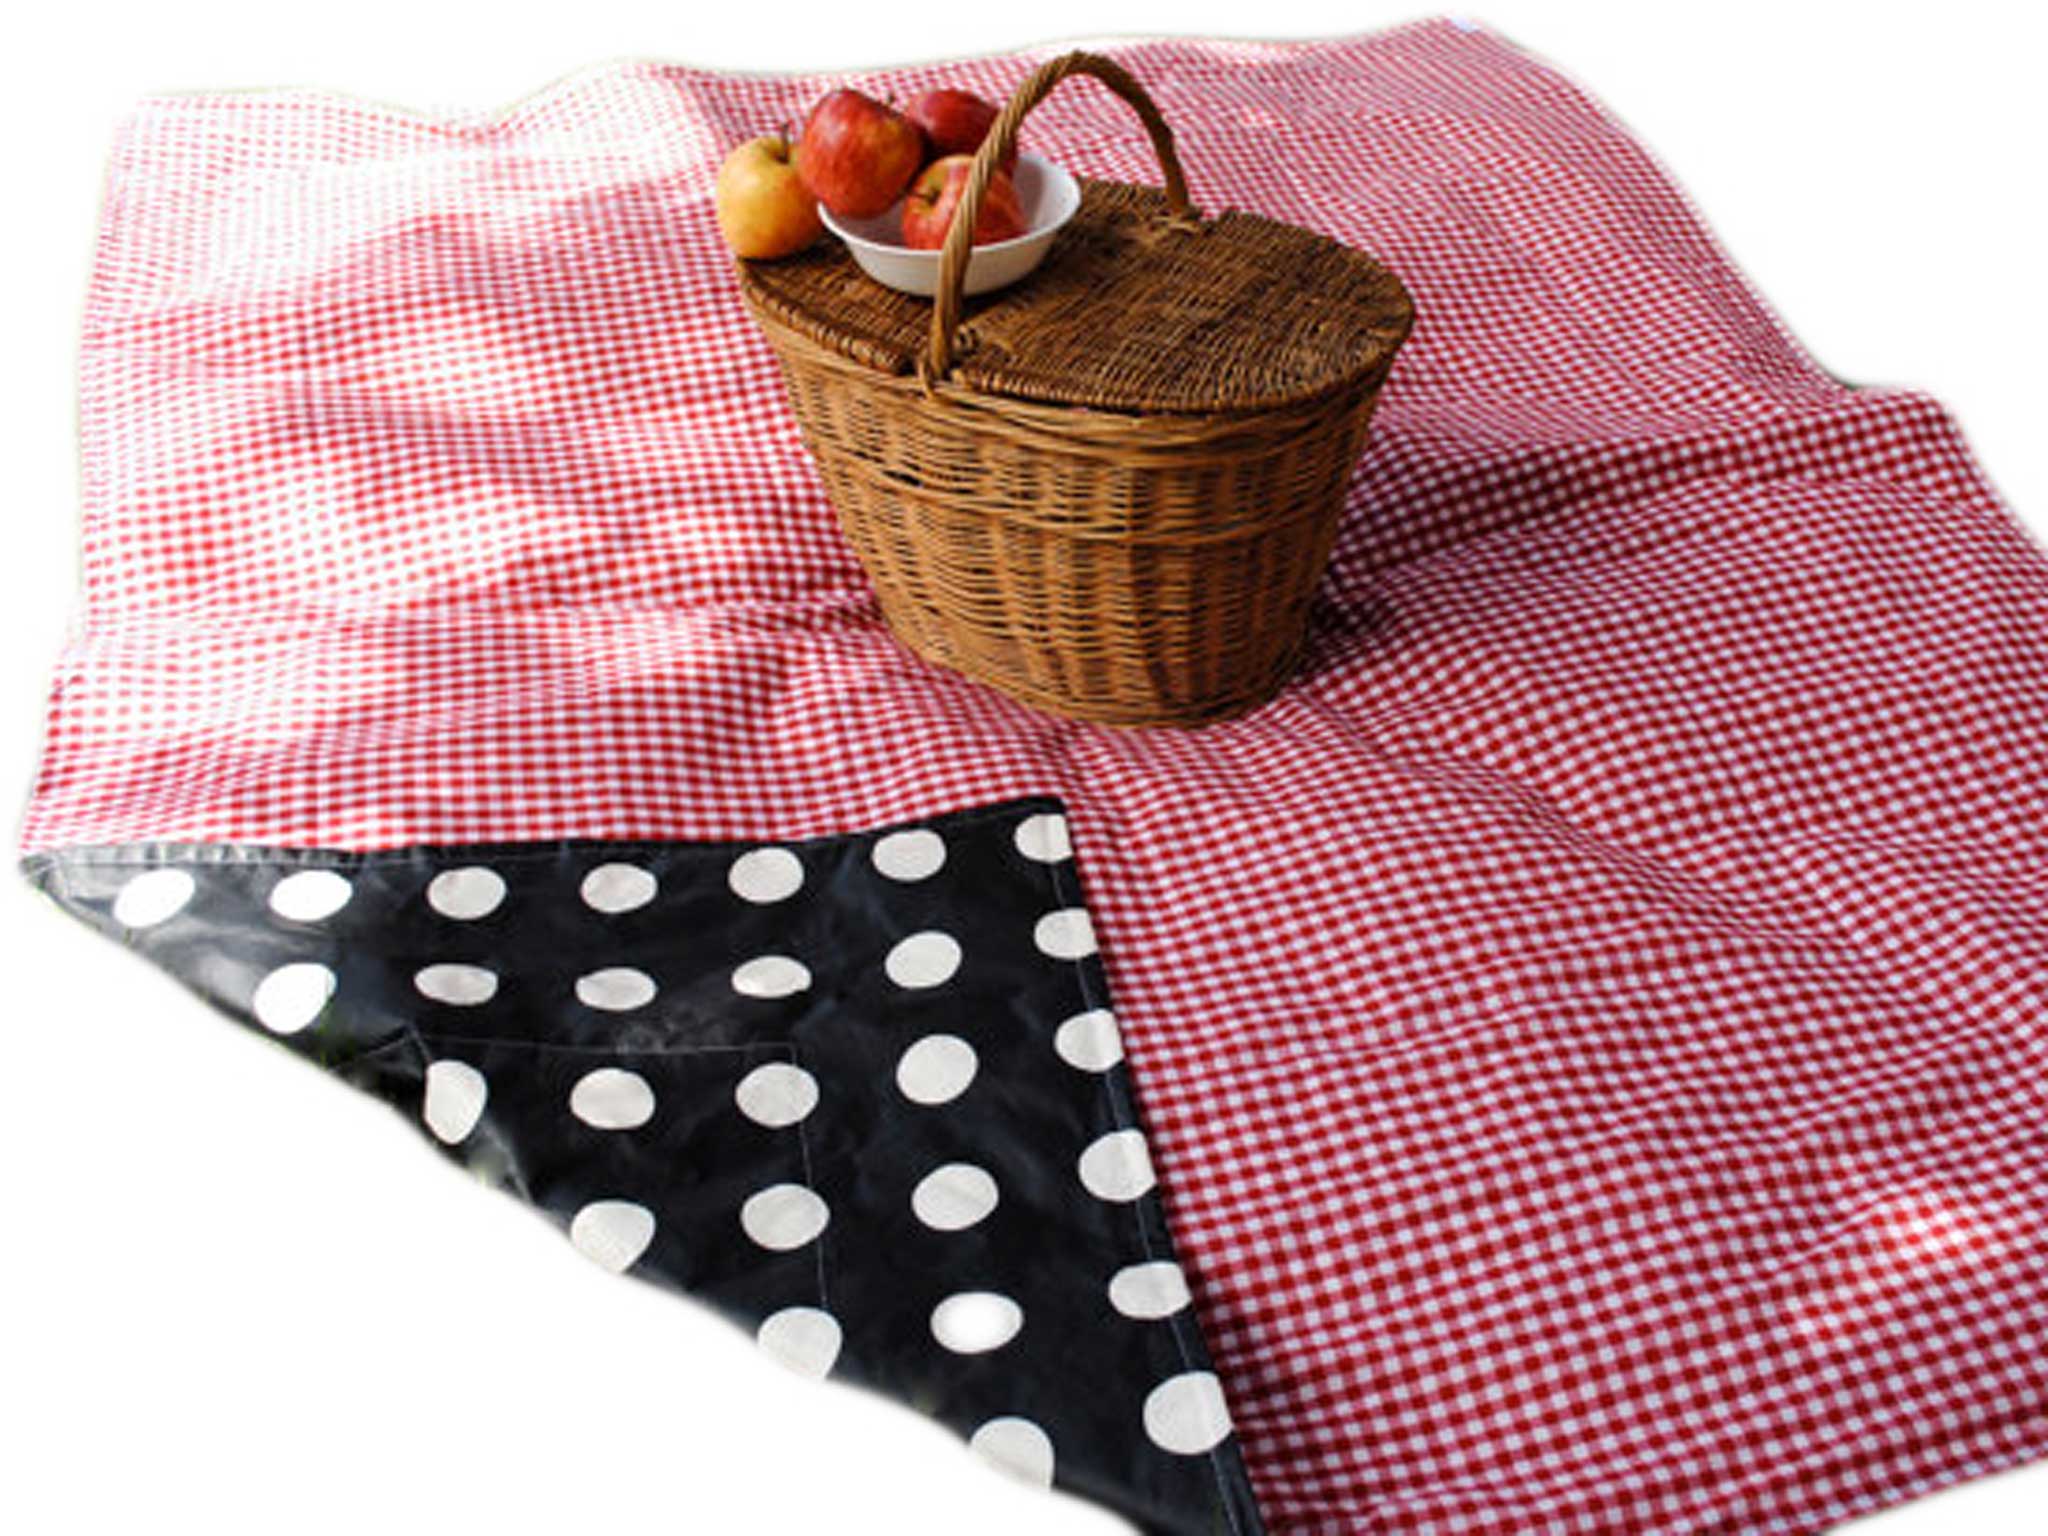 Picnic at Ascot Outdoor Picnic Blanket with Waterproof ...